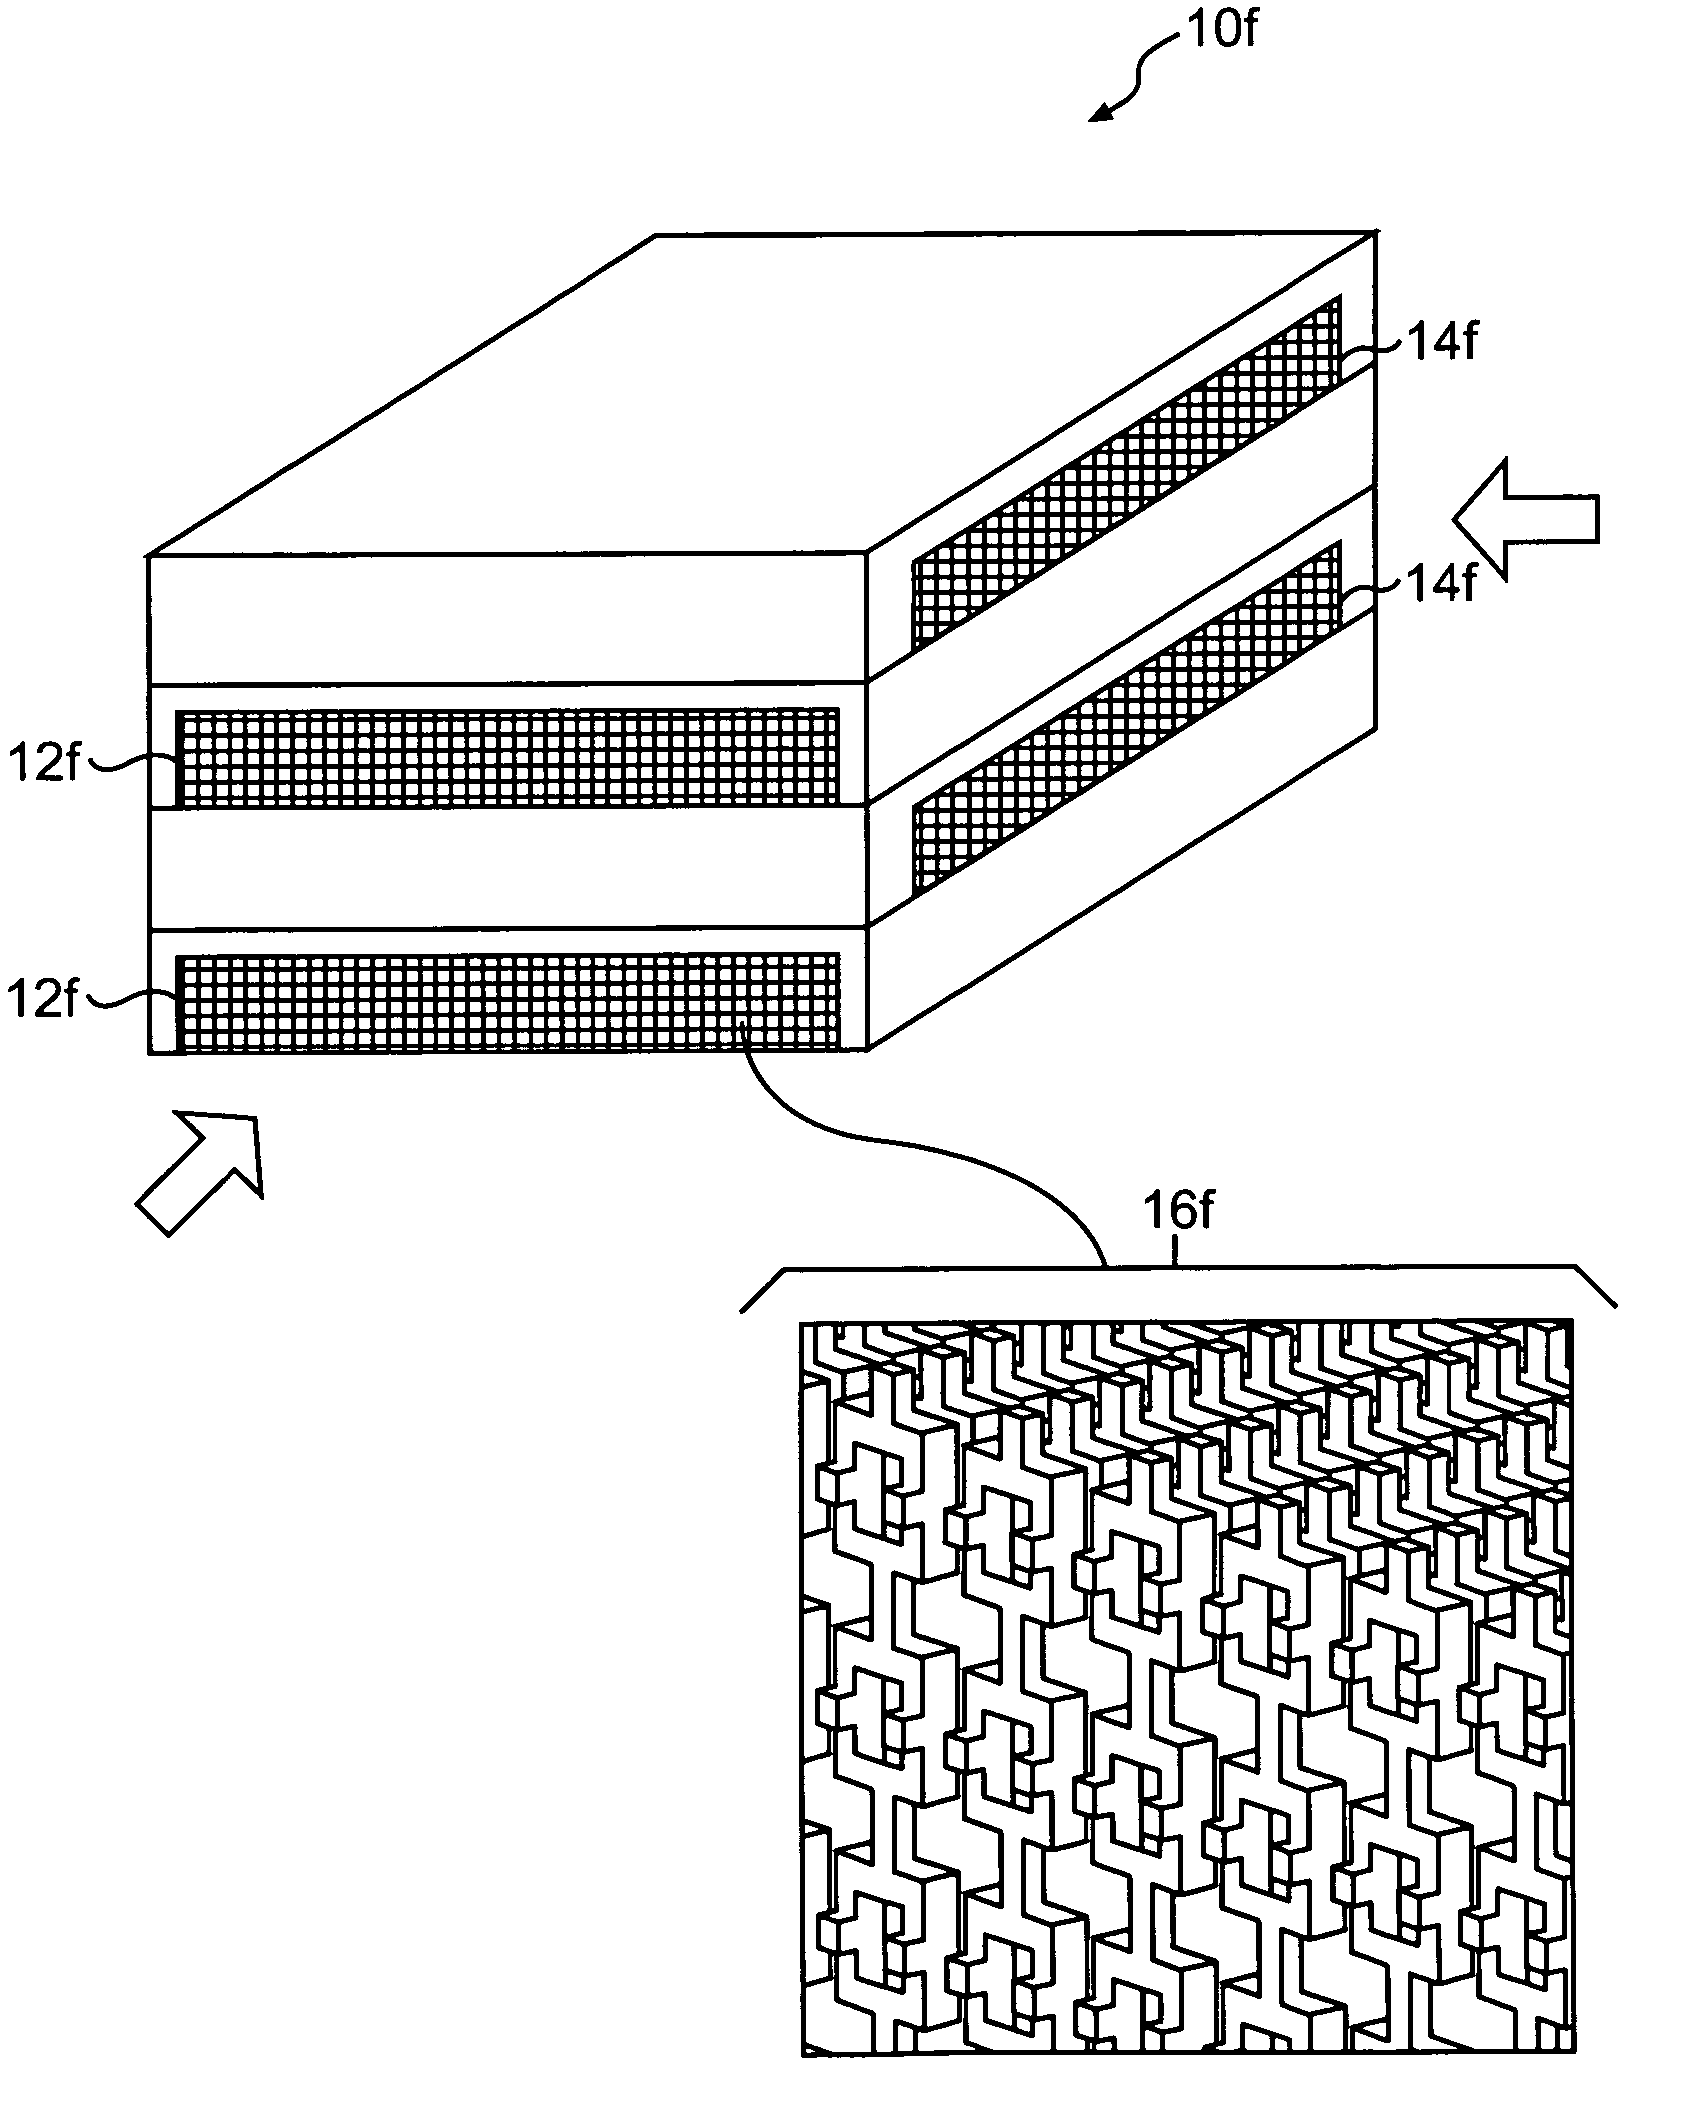 Micro heat exchanger with thermally conductive porous network